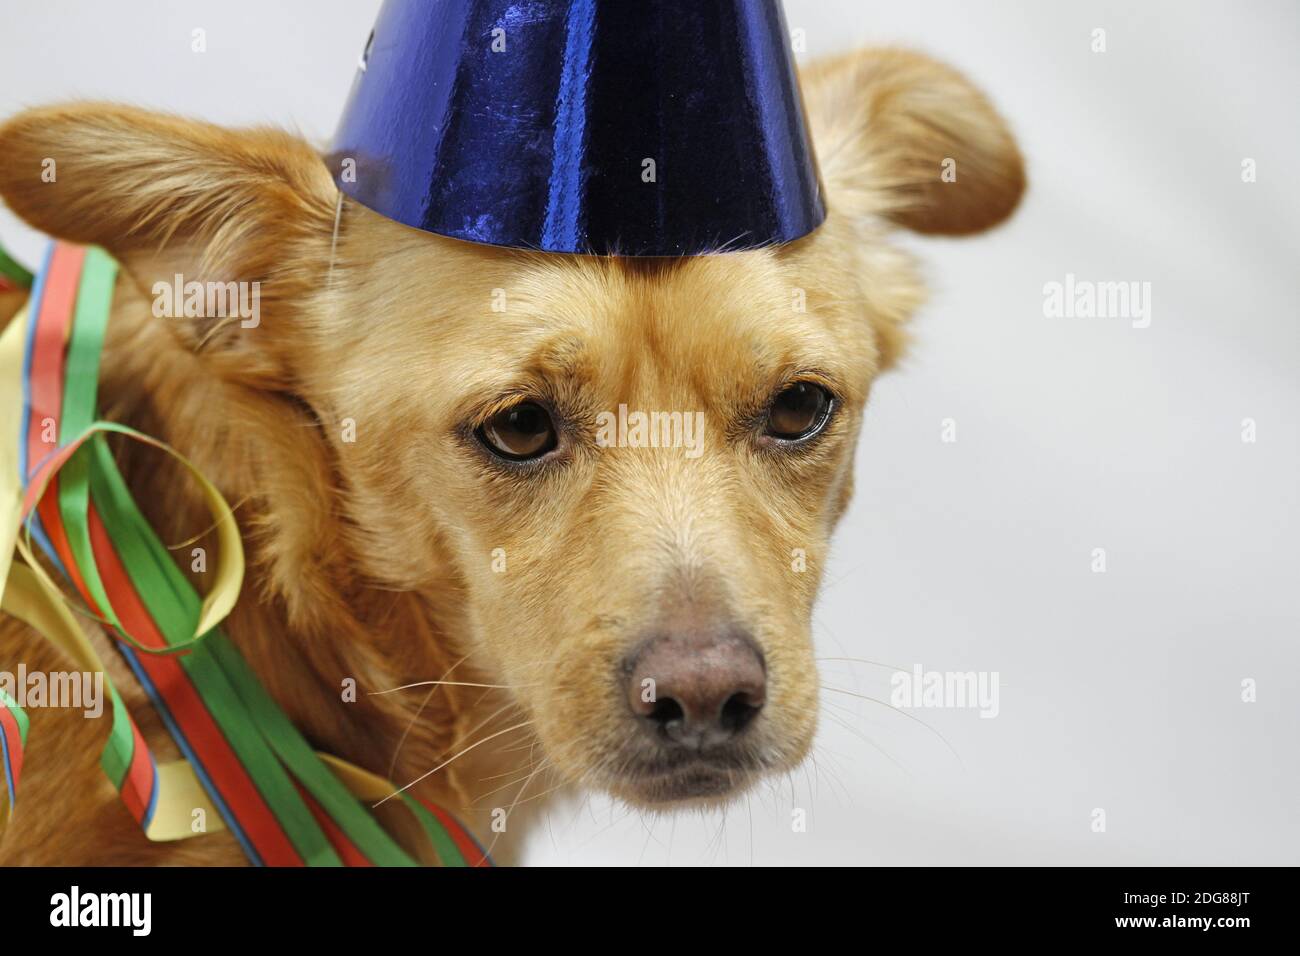 Dog with hat and streamers Stock Photo